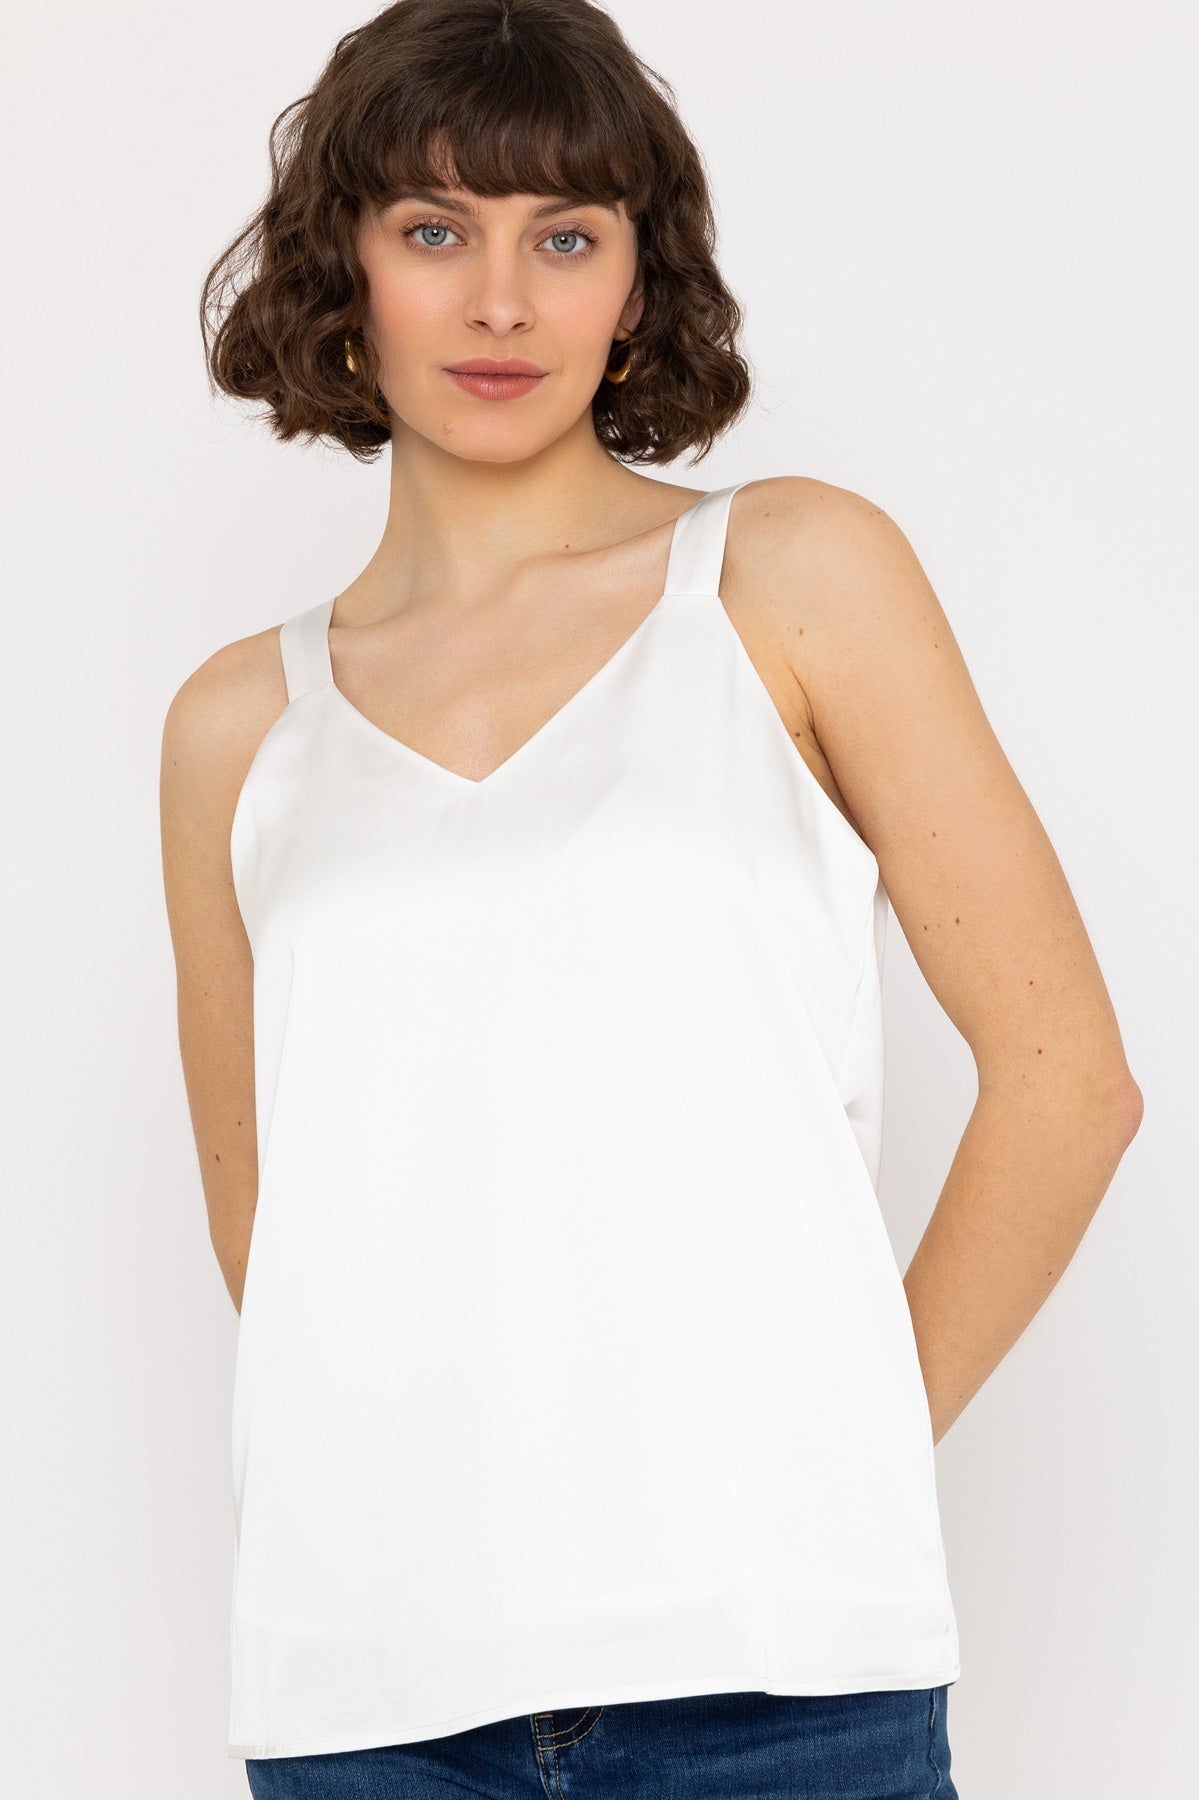 Silky Cami Top in Ivory